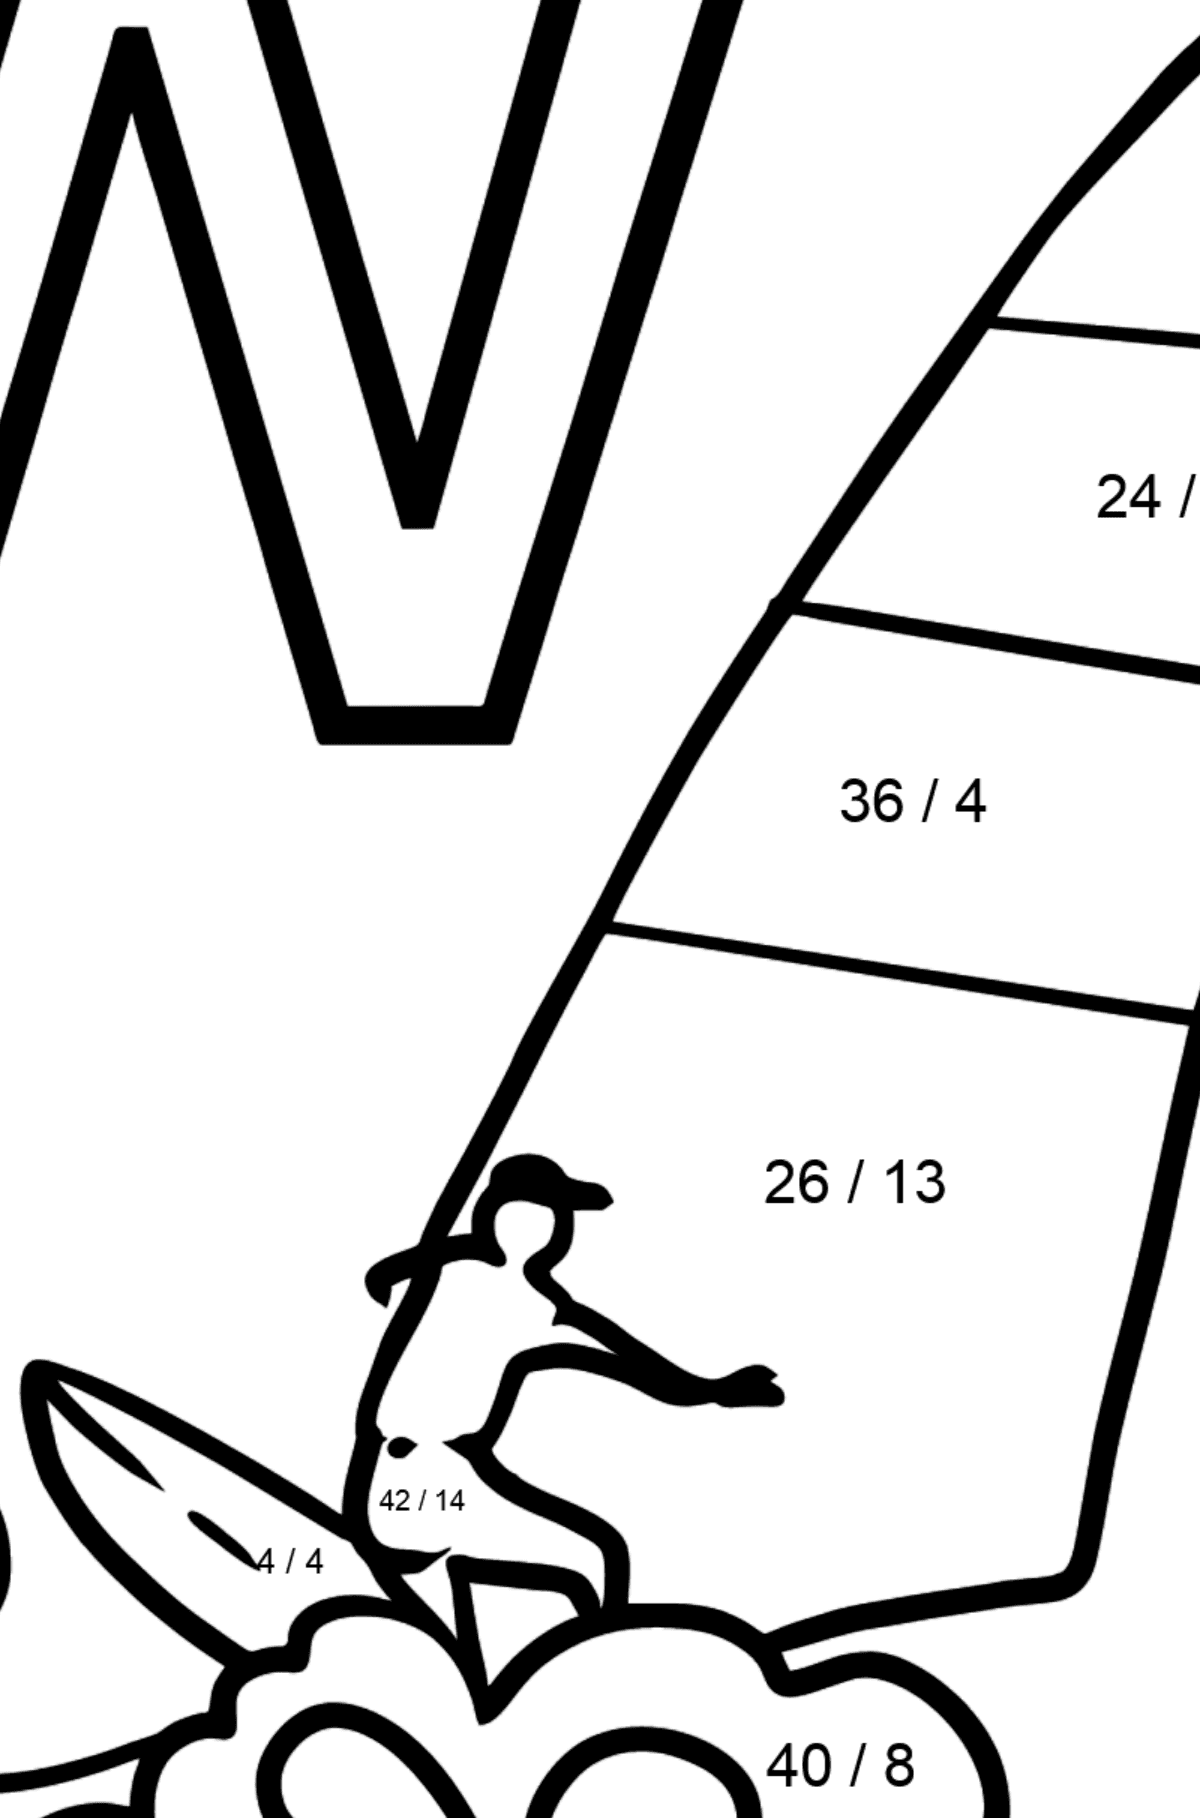 Portuguese Letter W coloring pages - WINDSURF - Math Coloring - Division for Kids